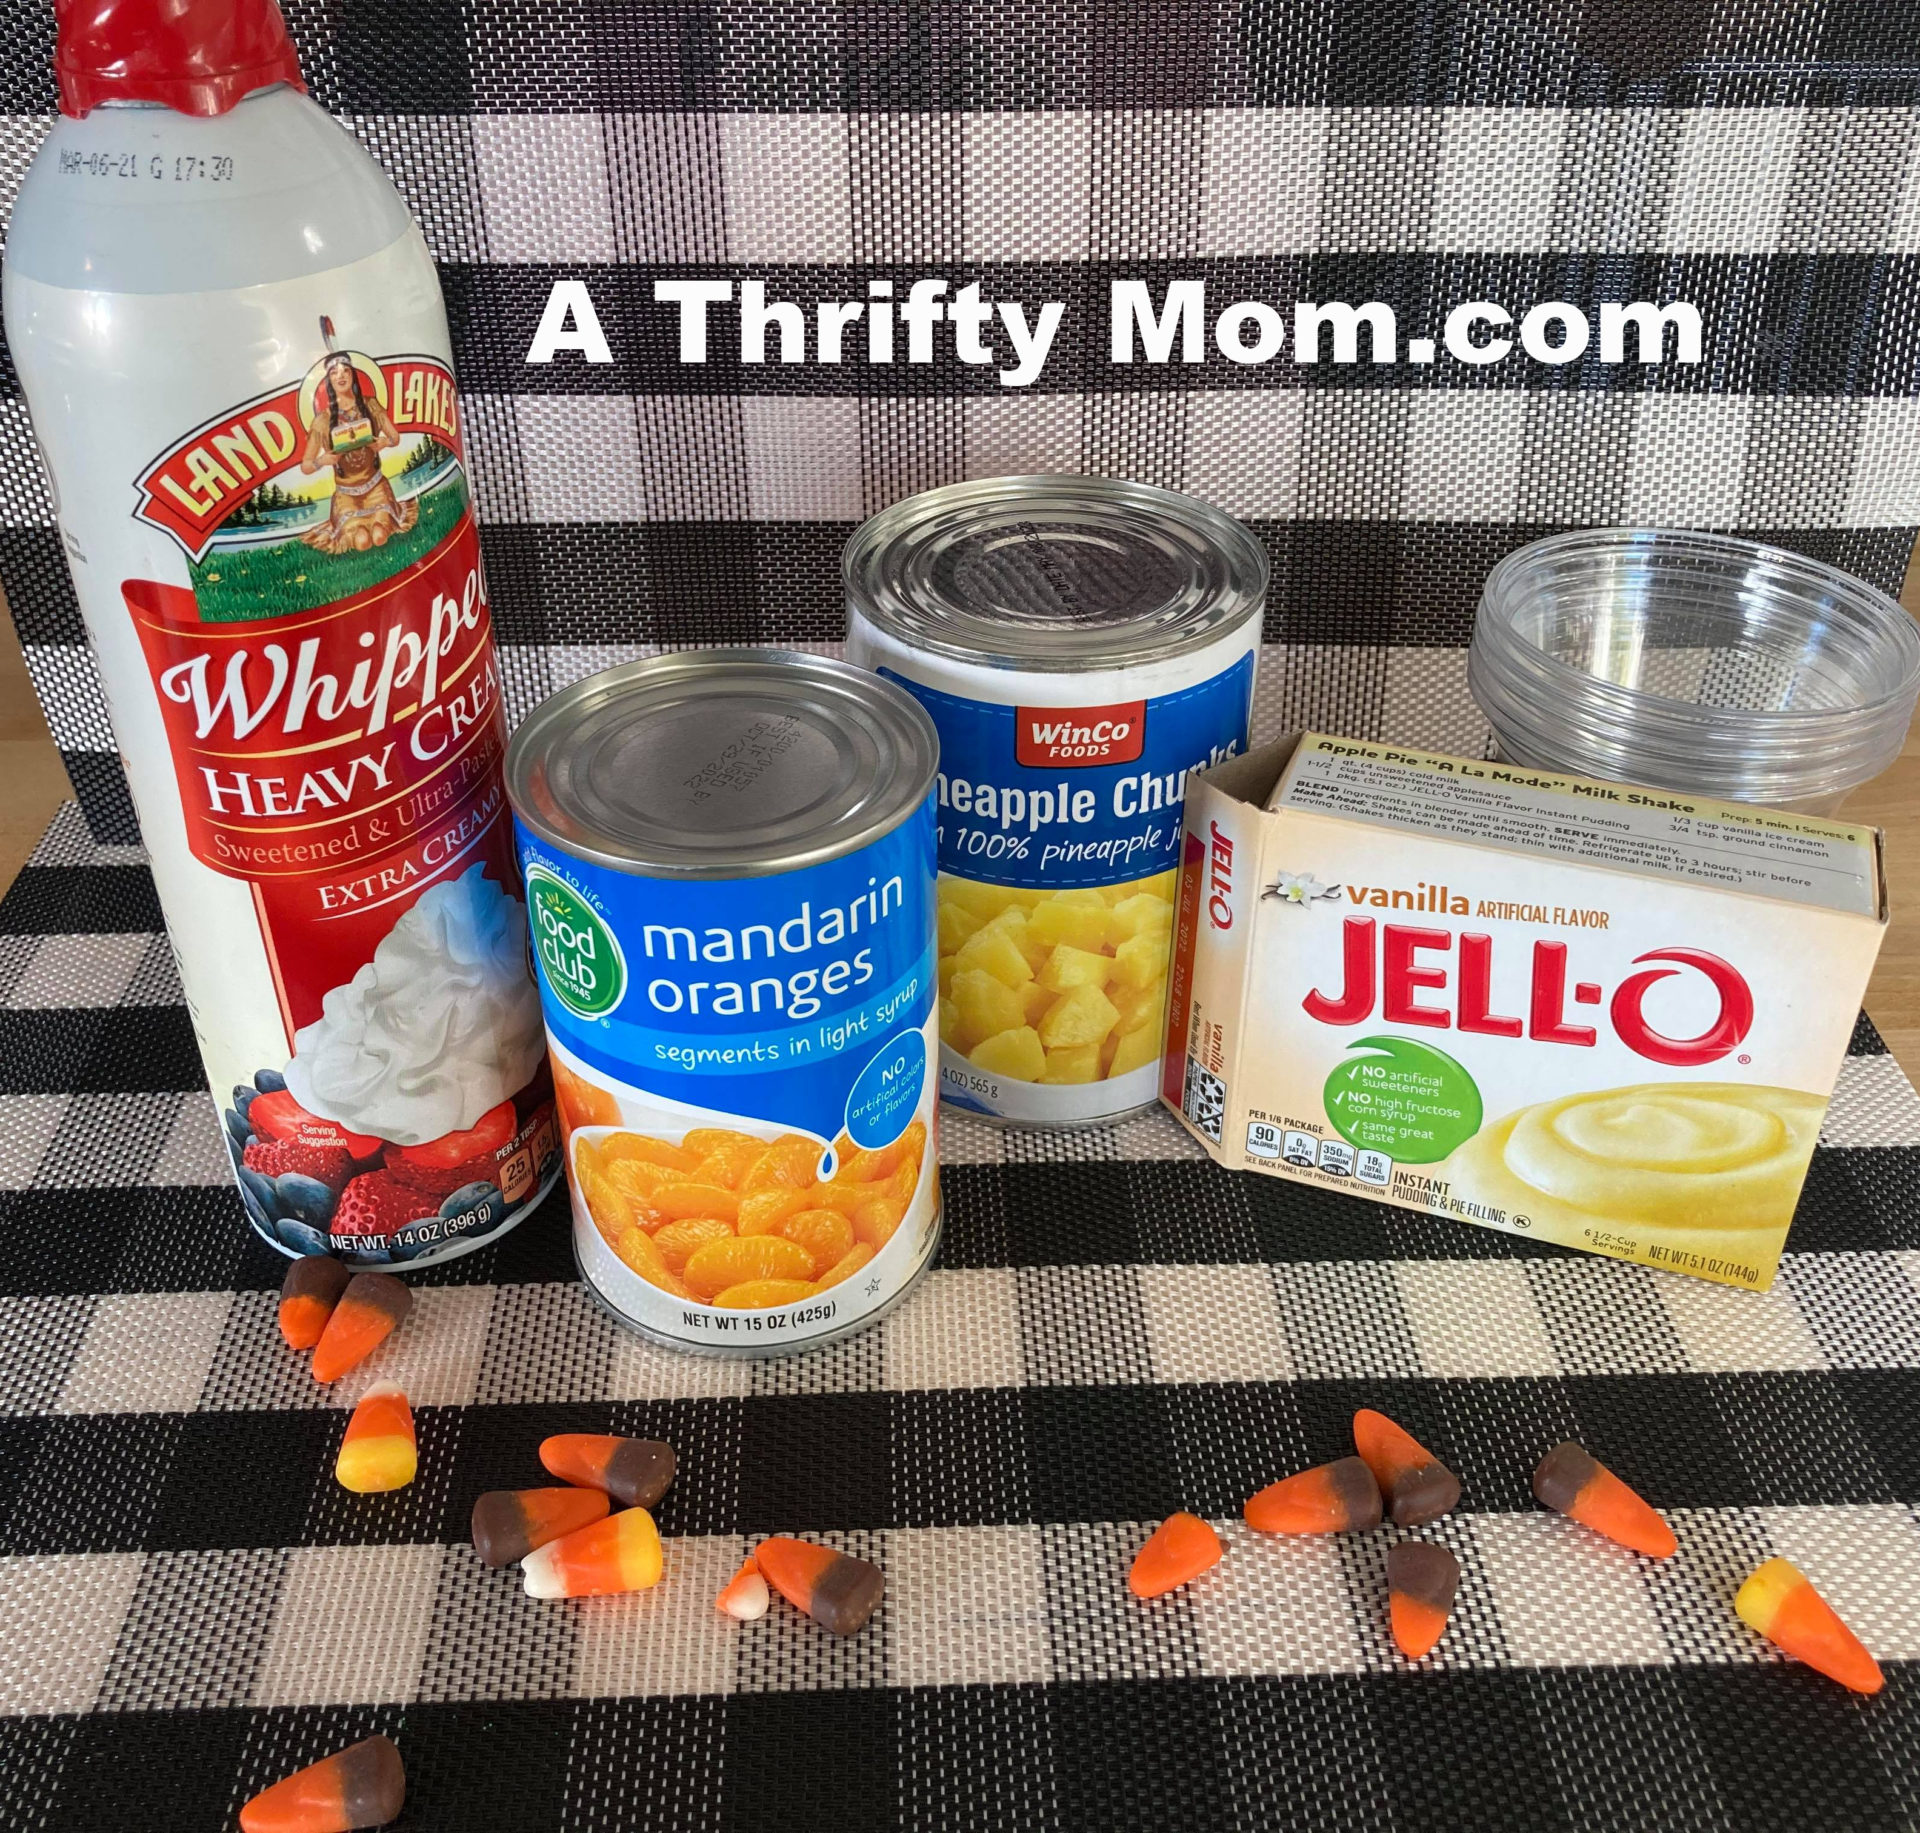 Candy Corn Cups - A Thrifty Mom - Recipes, Crafts, DIY and more